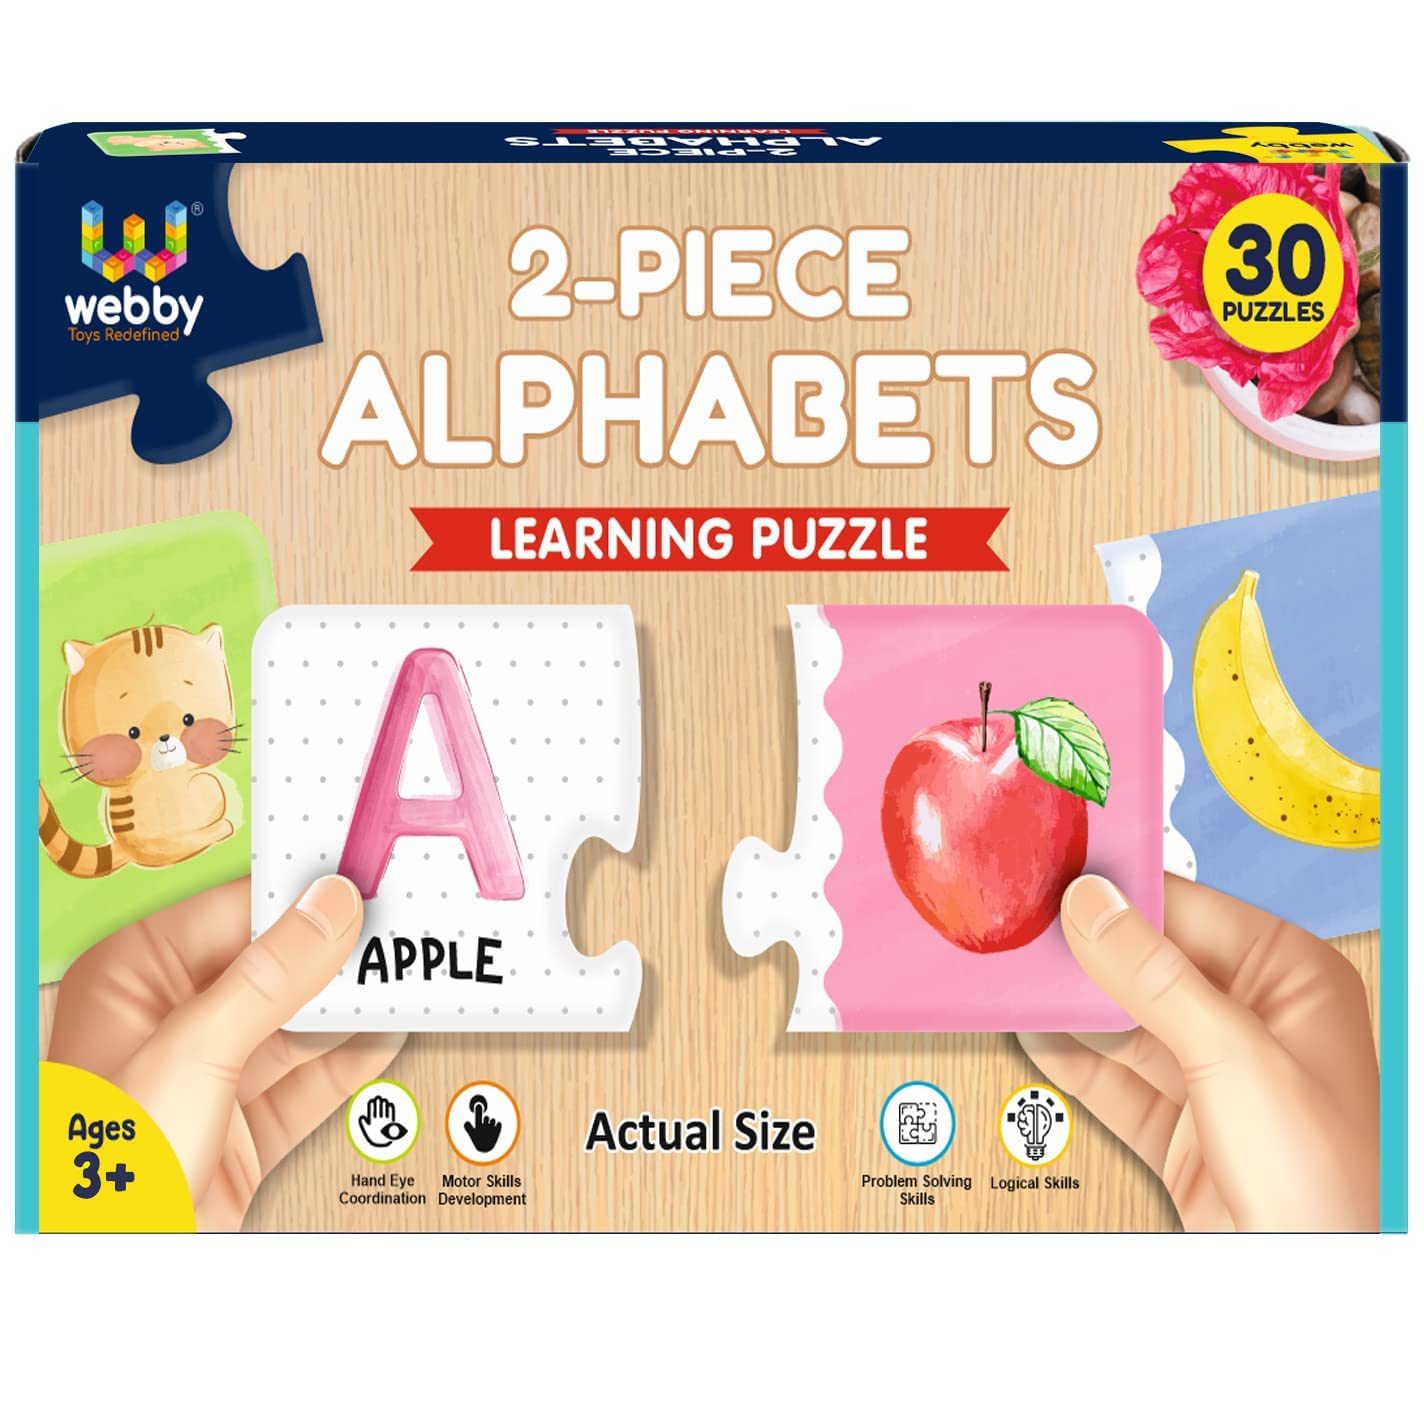 Alphabets 2 Pieces Learning Pack Jigsaw Puzzle